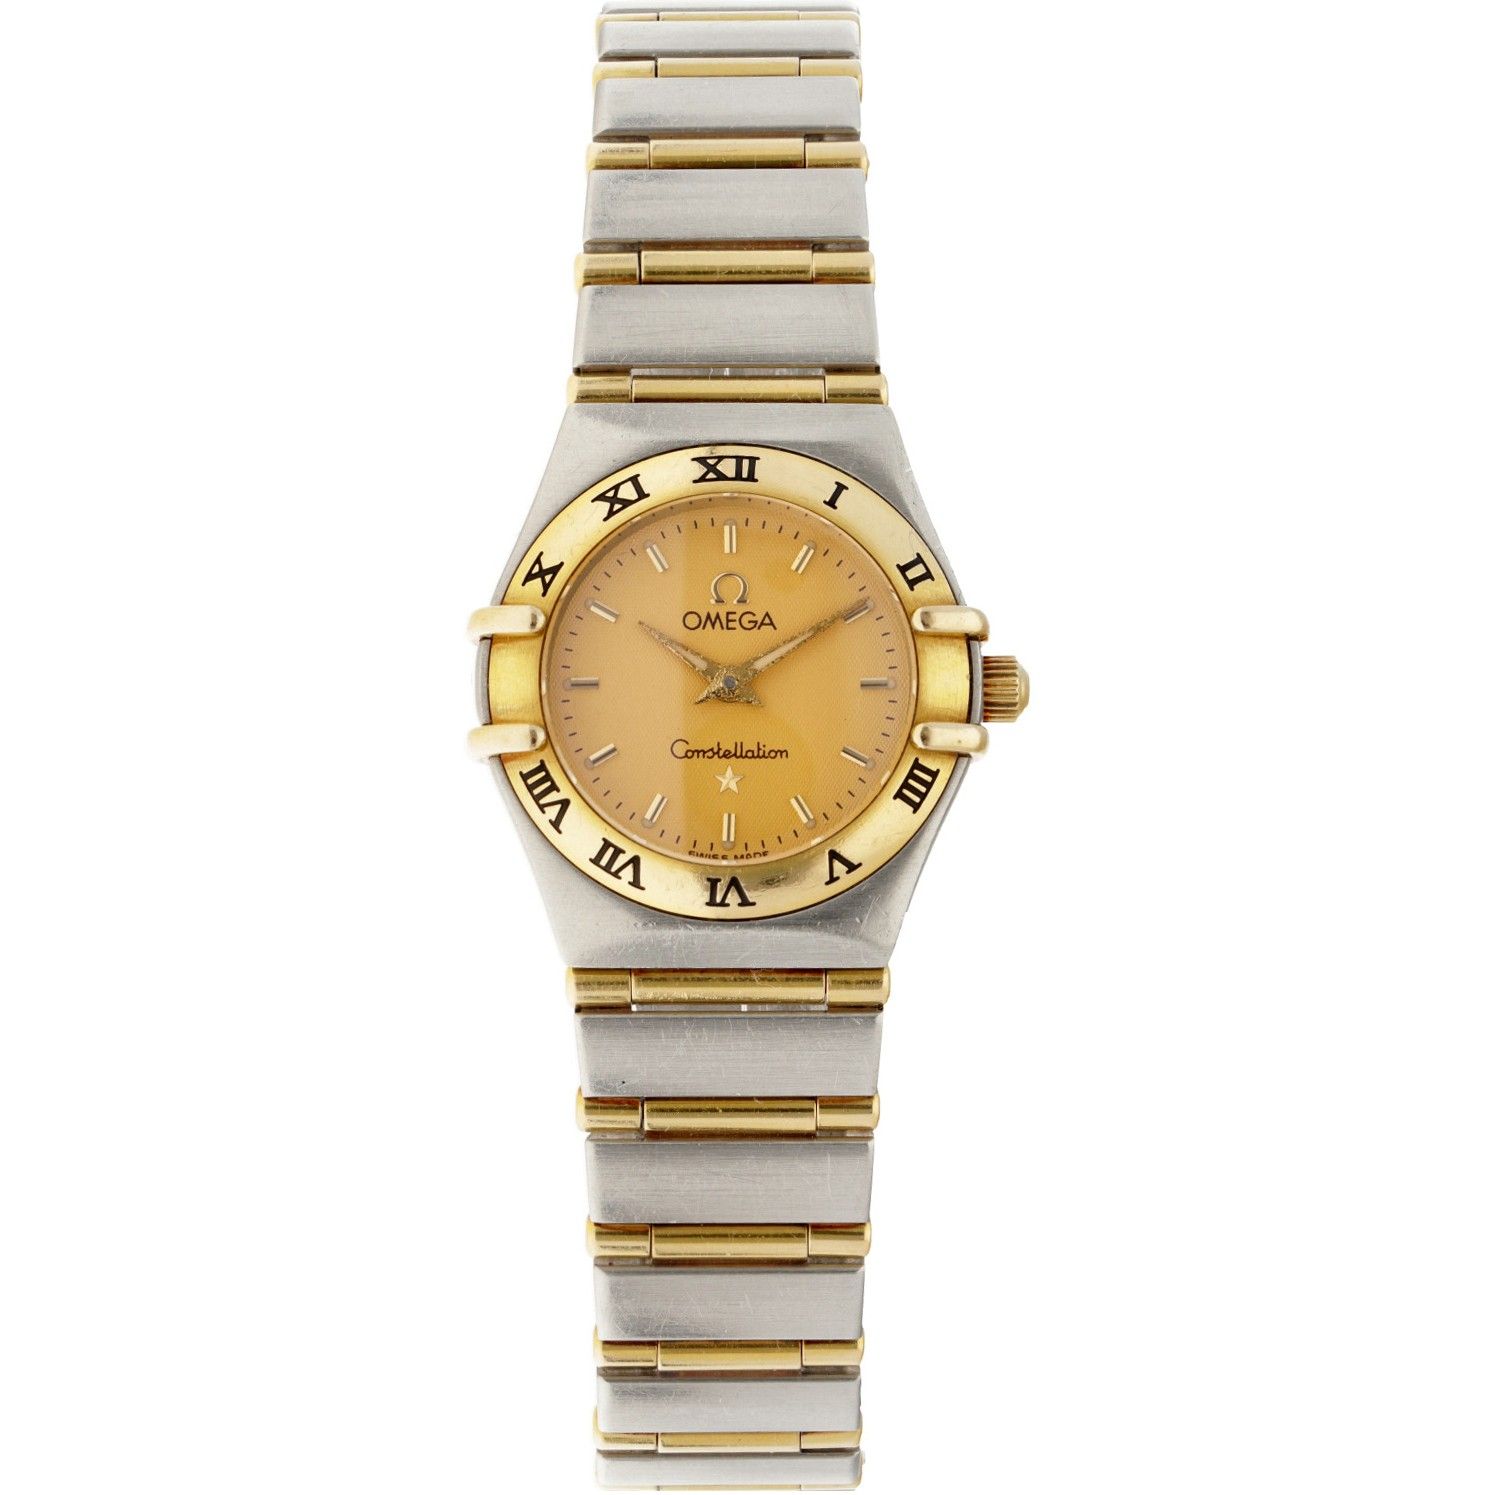 Omega Constellation 12621000 - Ladies watch - approx. 1998. Case: gold/steel (18&hellip;